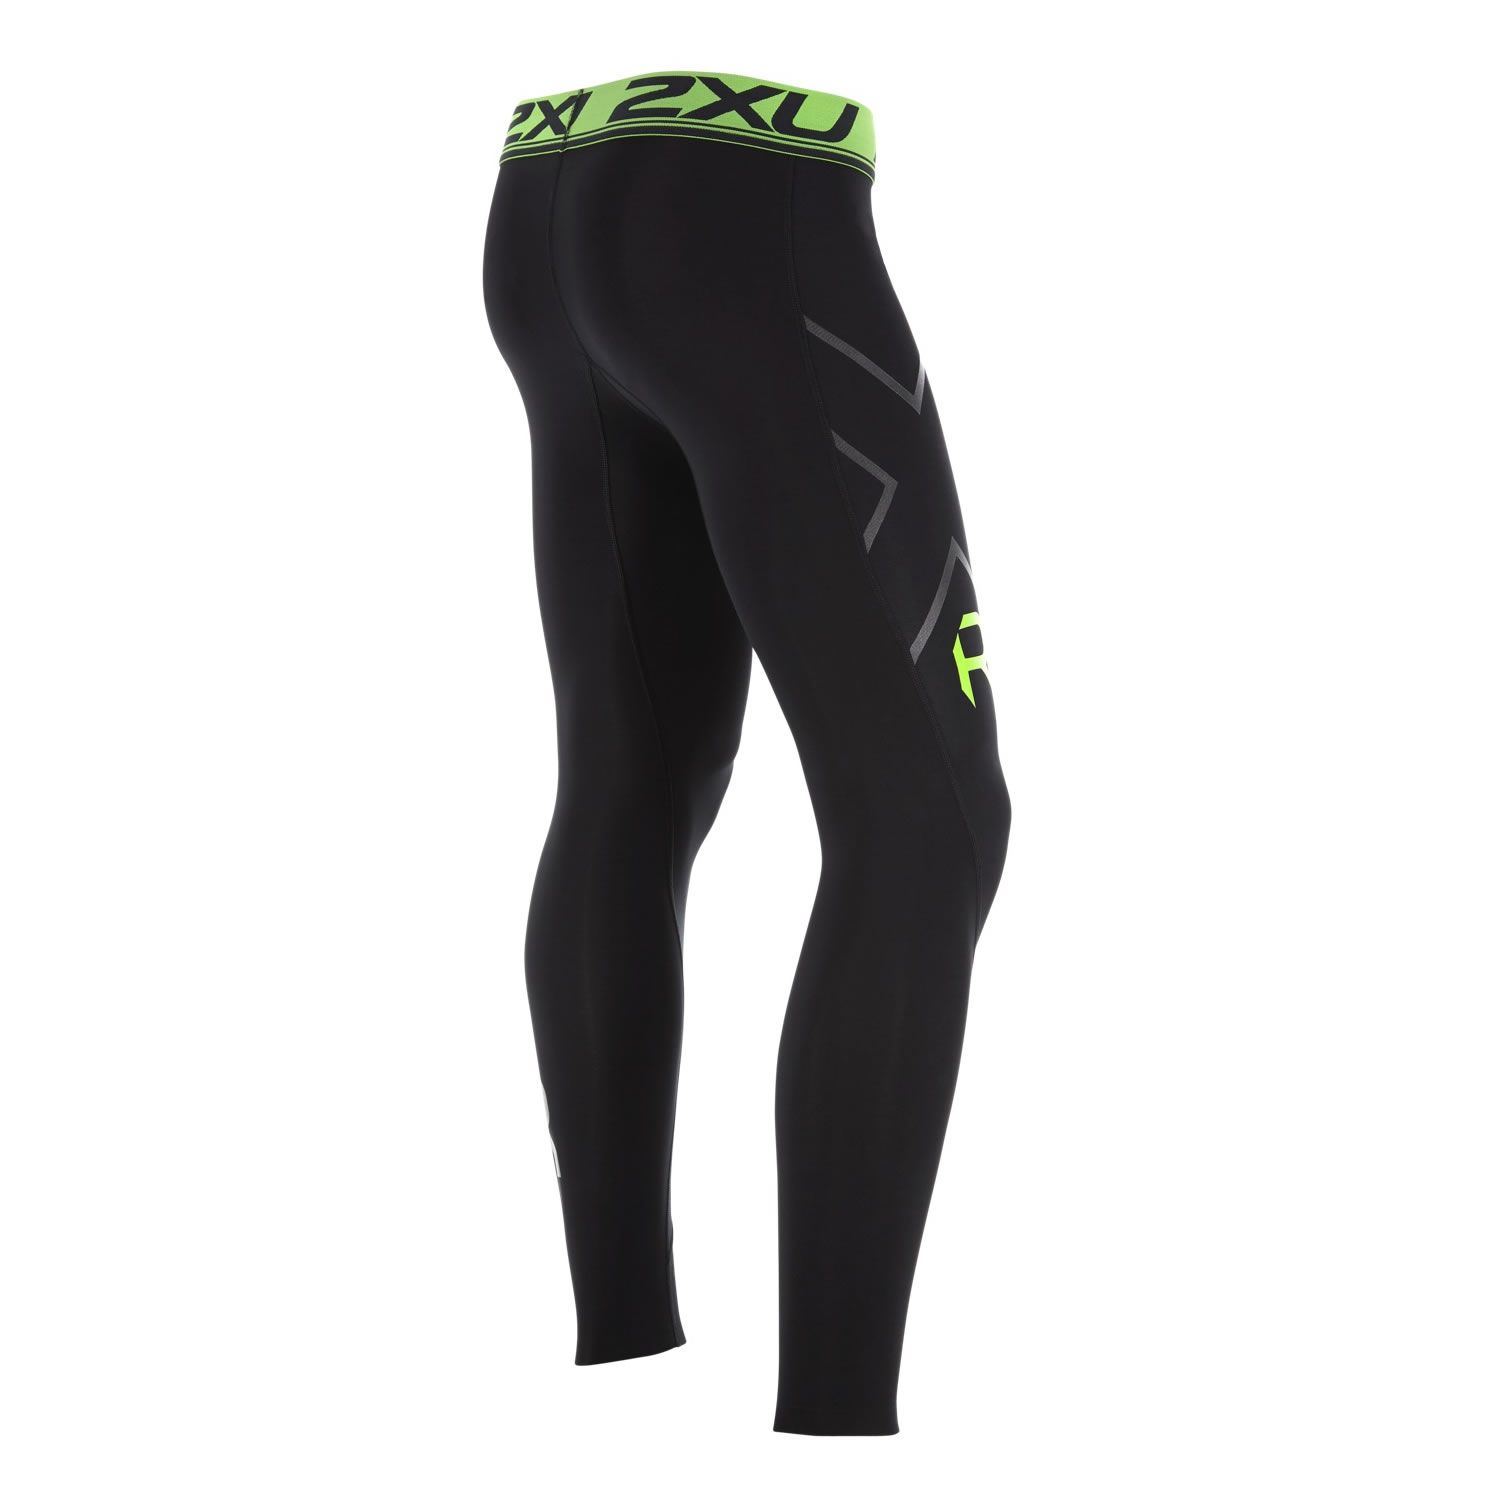 POWER RECOVERY COMPRESSION TIGHTS (25-30 mmhg)